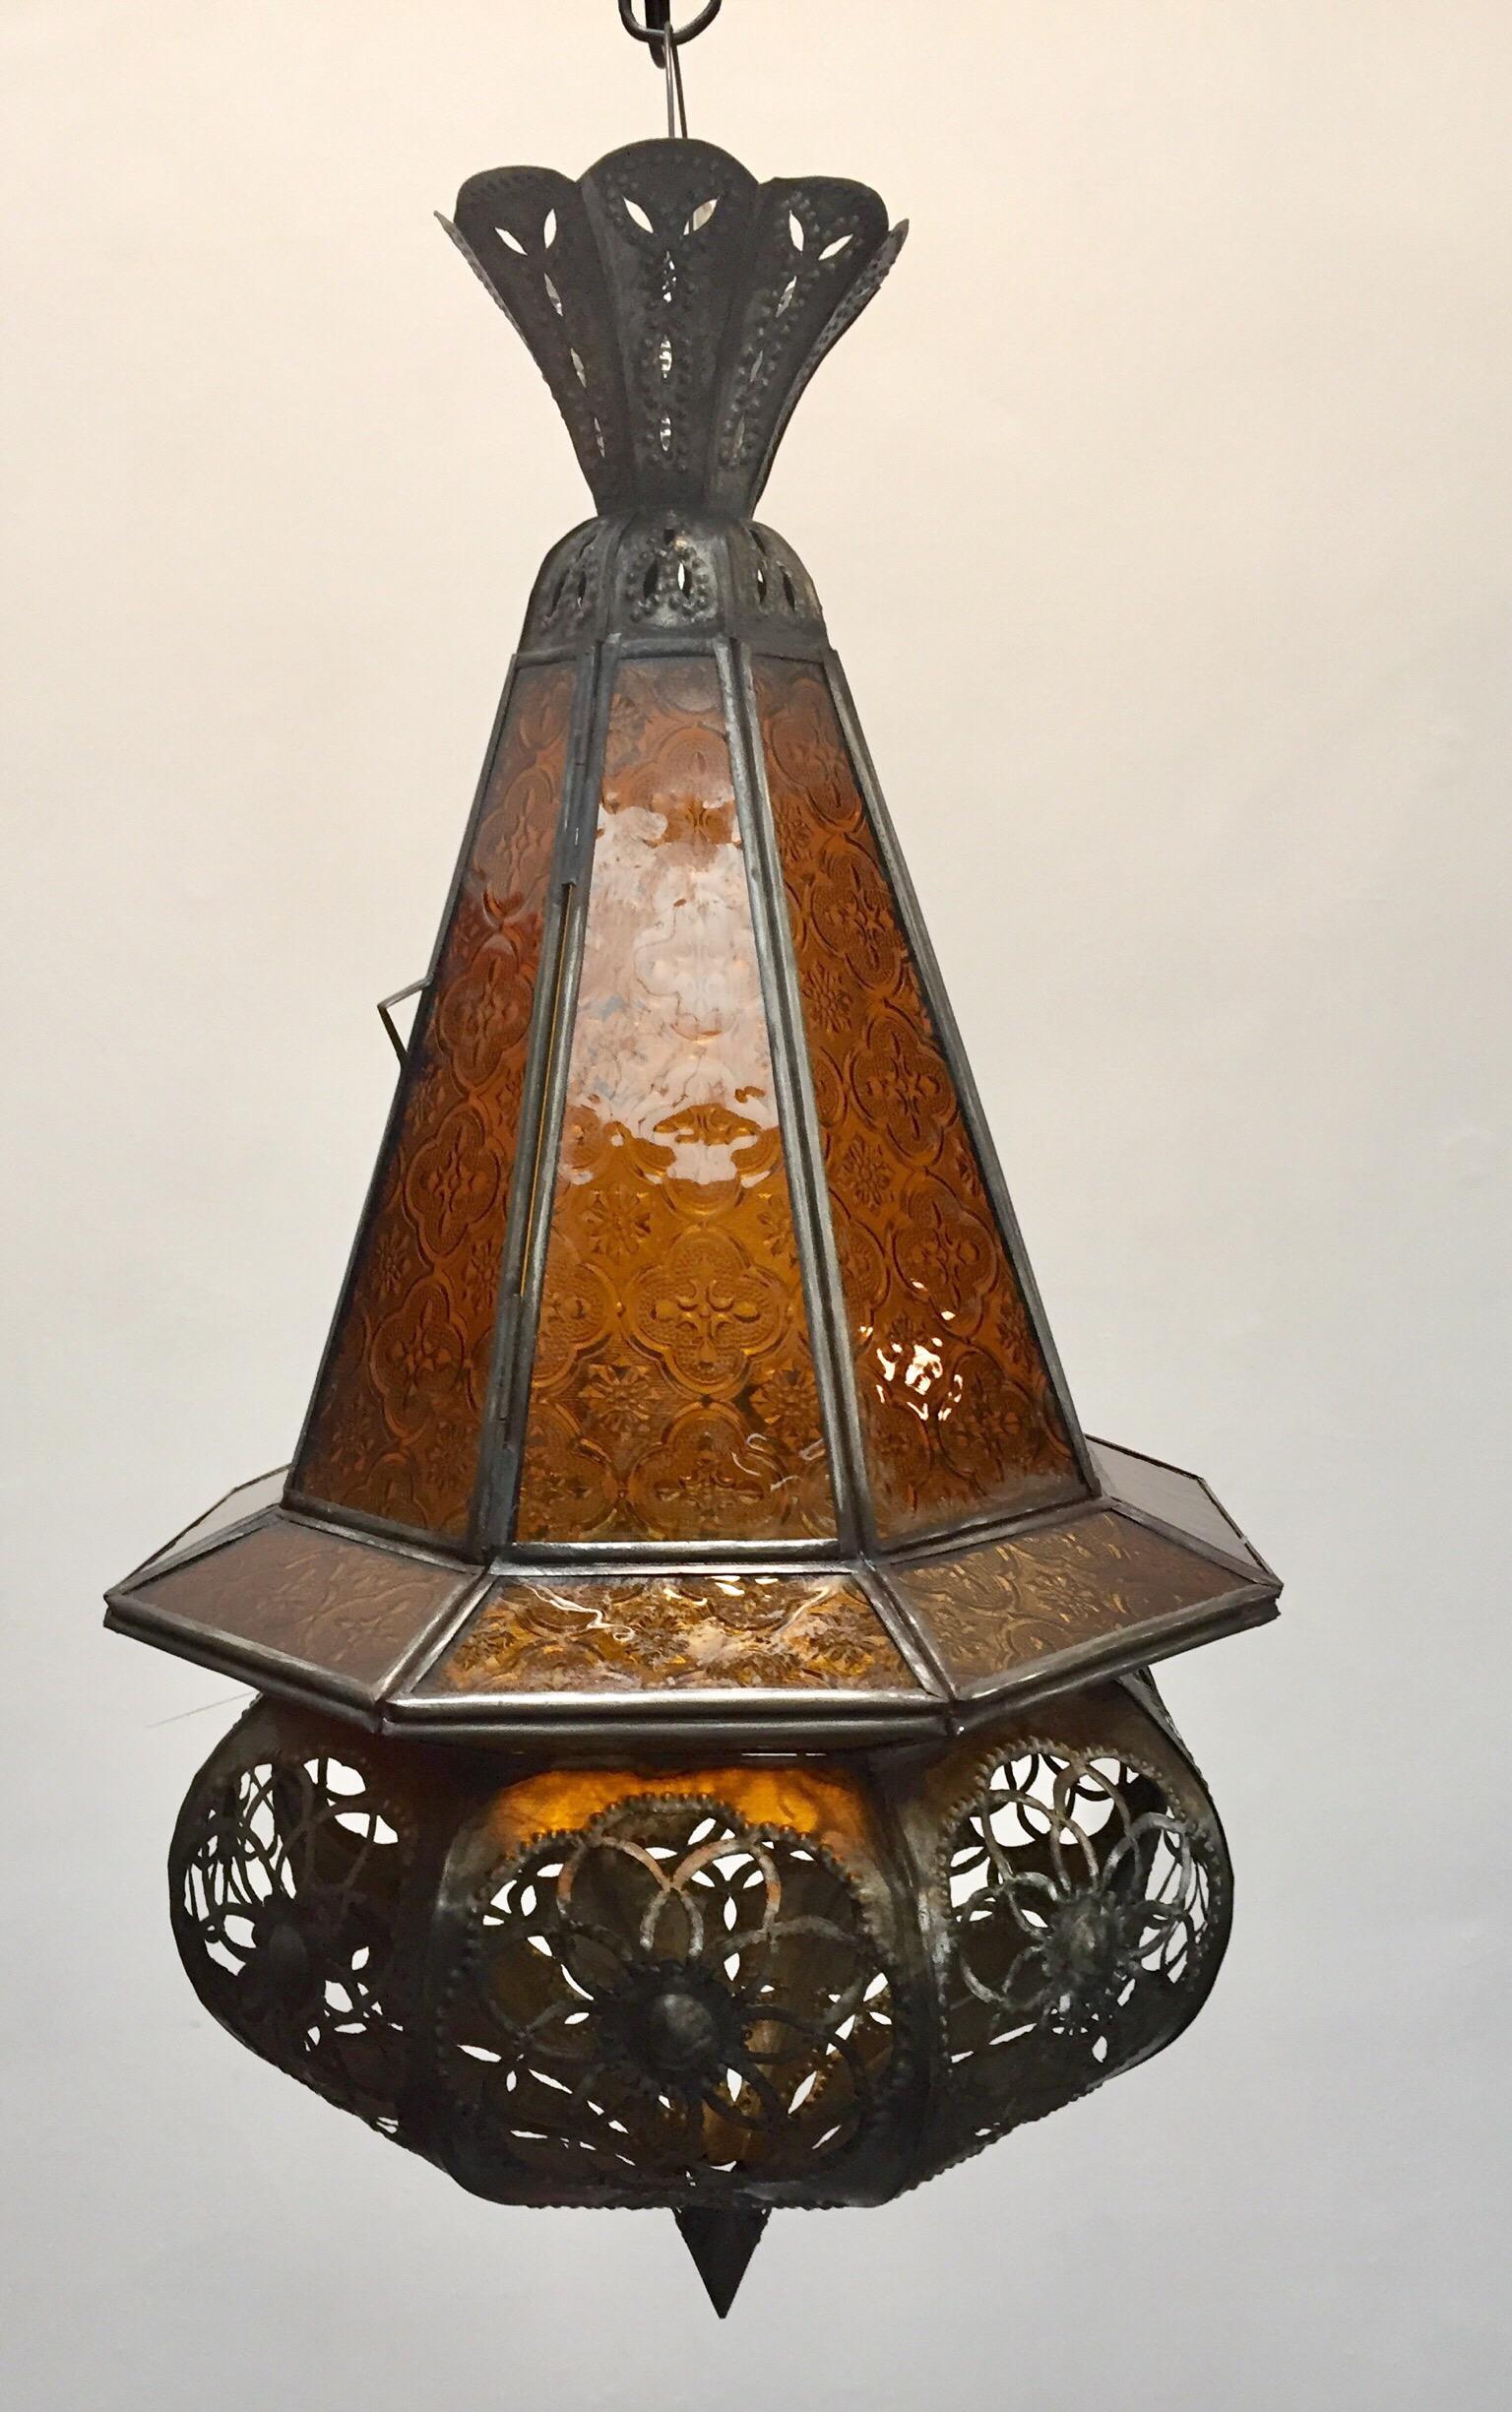 Stylish handcrafted Moroccan lantern pendant with amber molded glass and metal with an antique bronze finish. Moroccan handcrafted Moorish amber glass lantern pendant. Finely handcrafted with open metal work Moorish floral and geometric